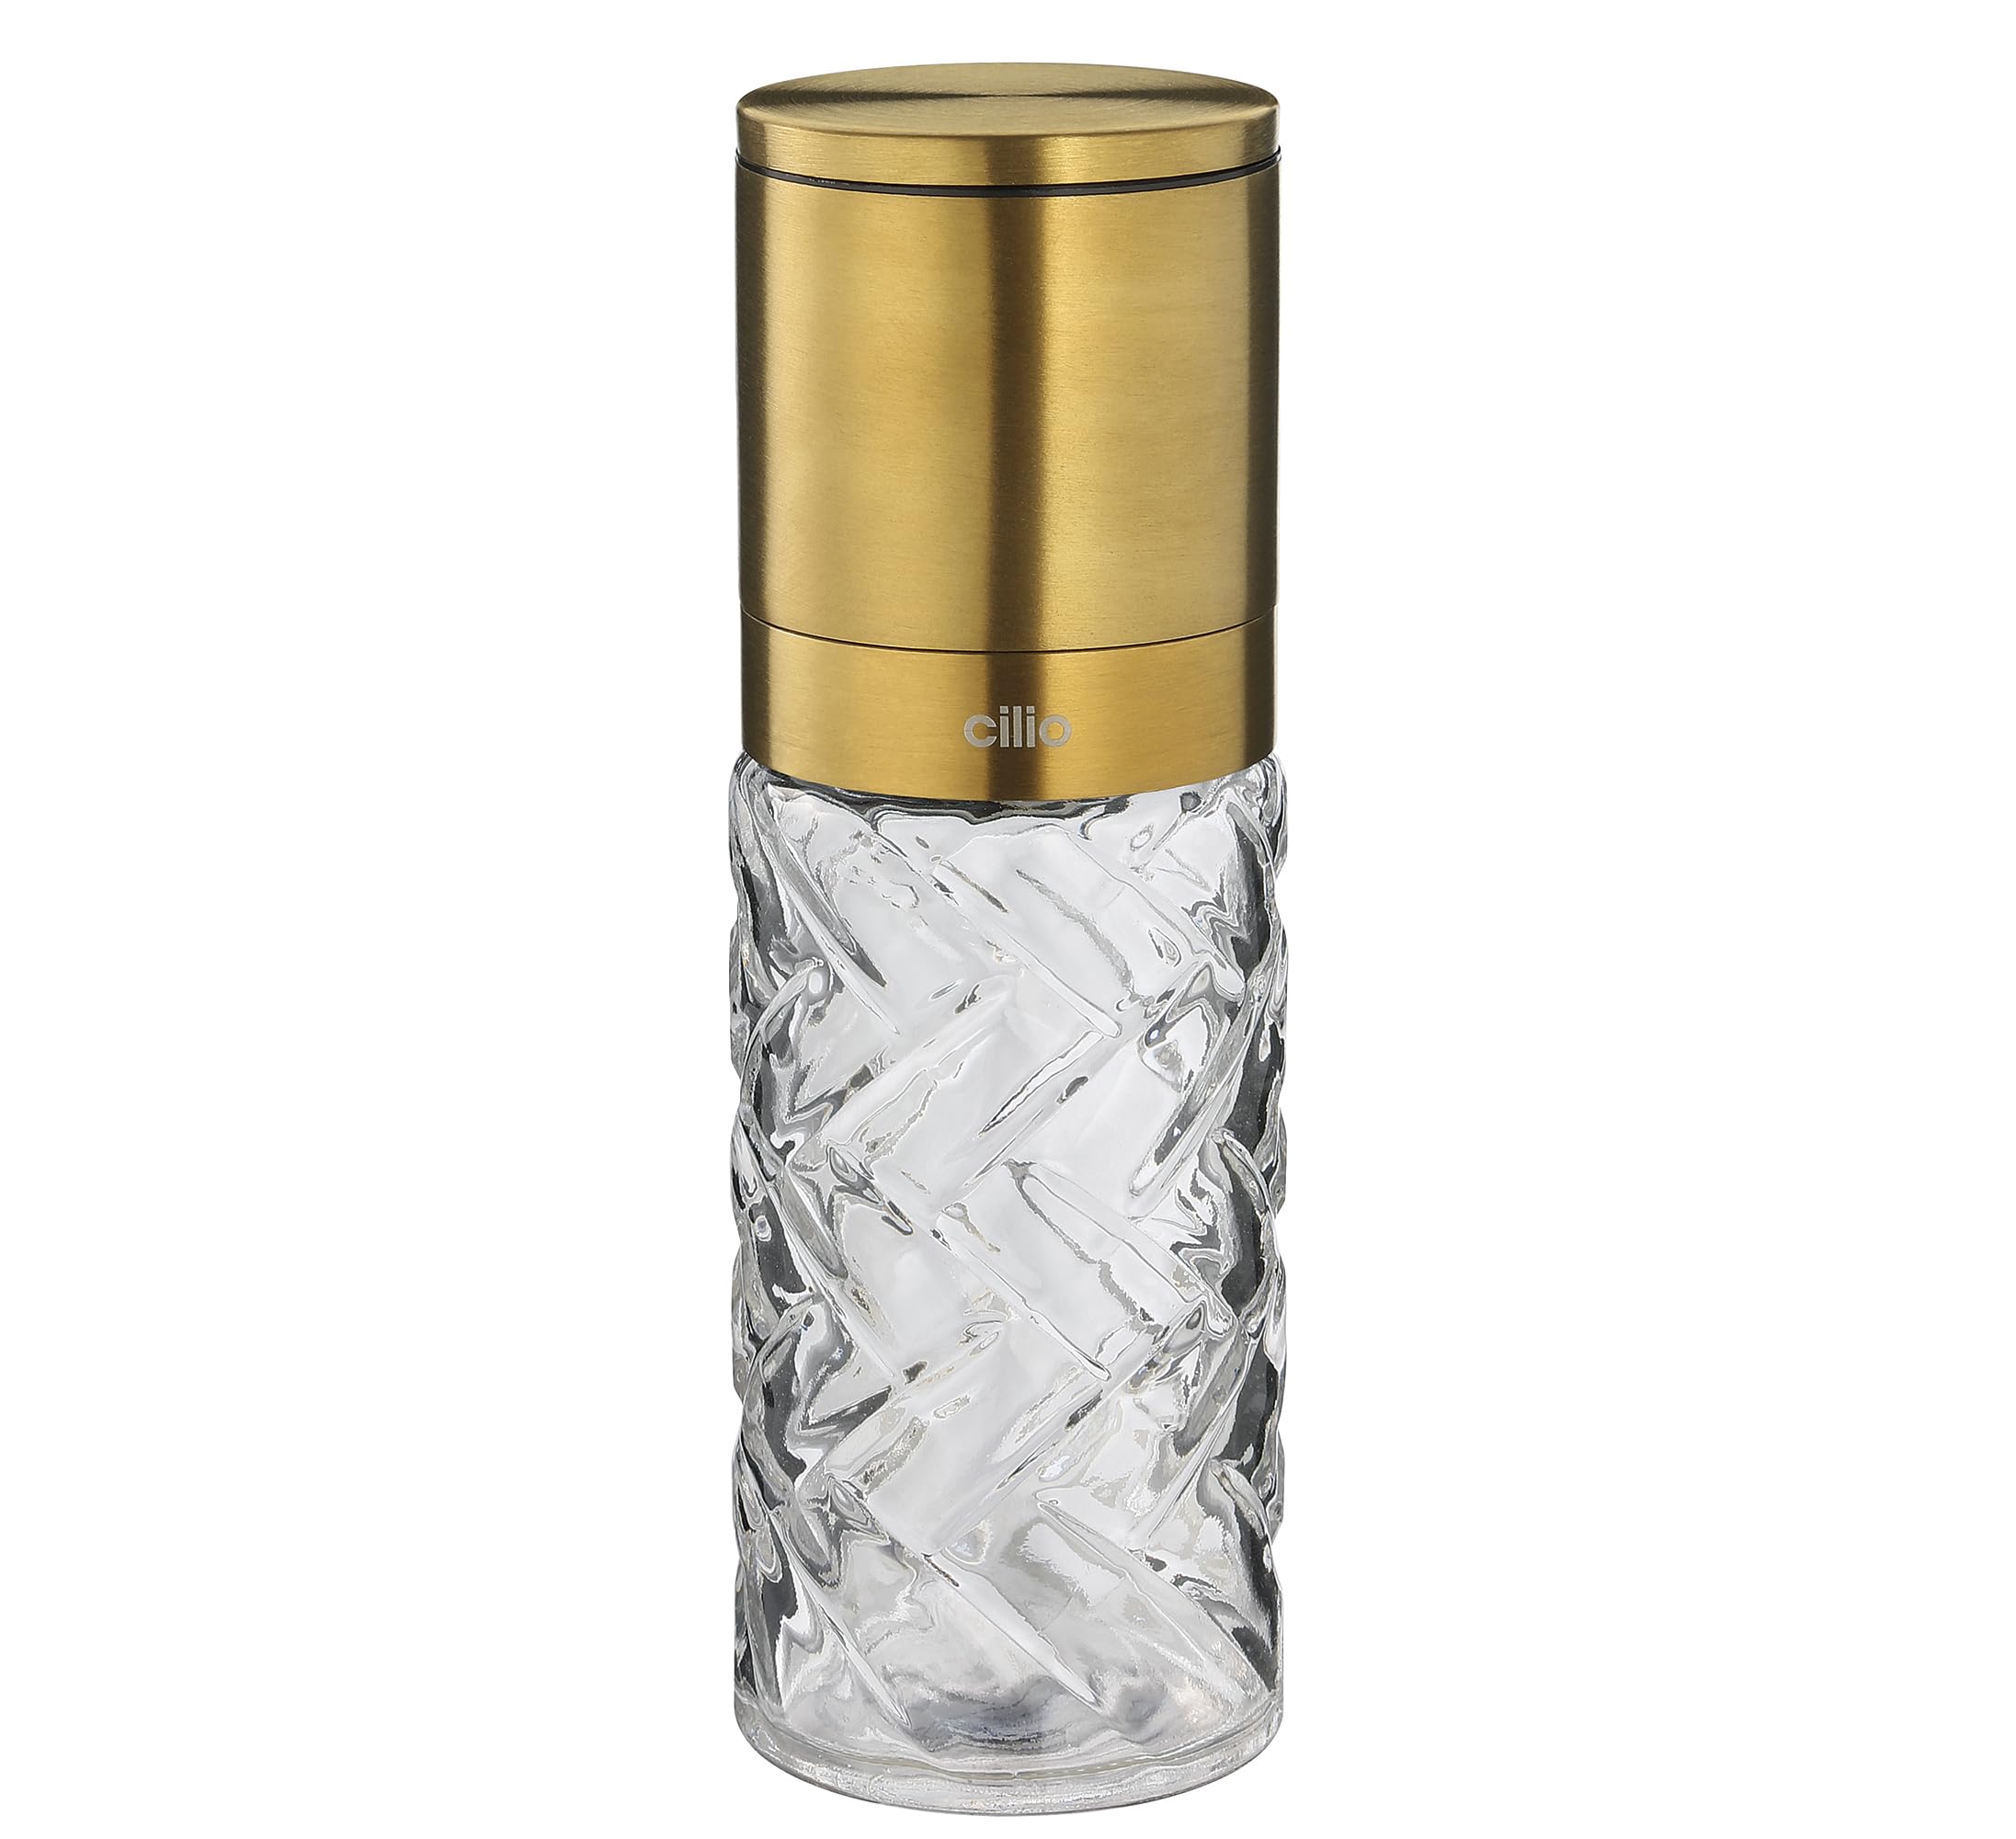 Cilio Cristallo Glass/Stainless Steel Salt or Pepper Mill, Gold, 2